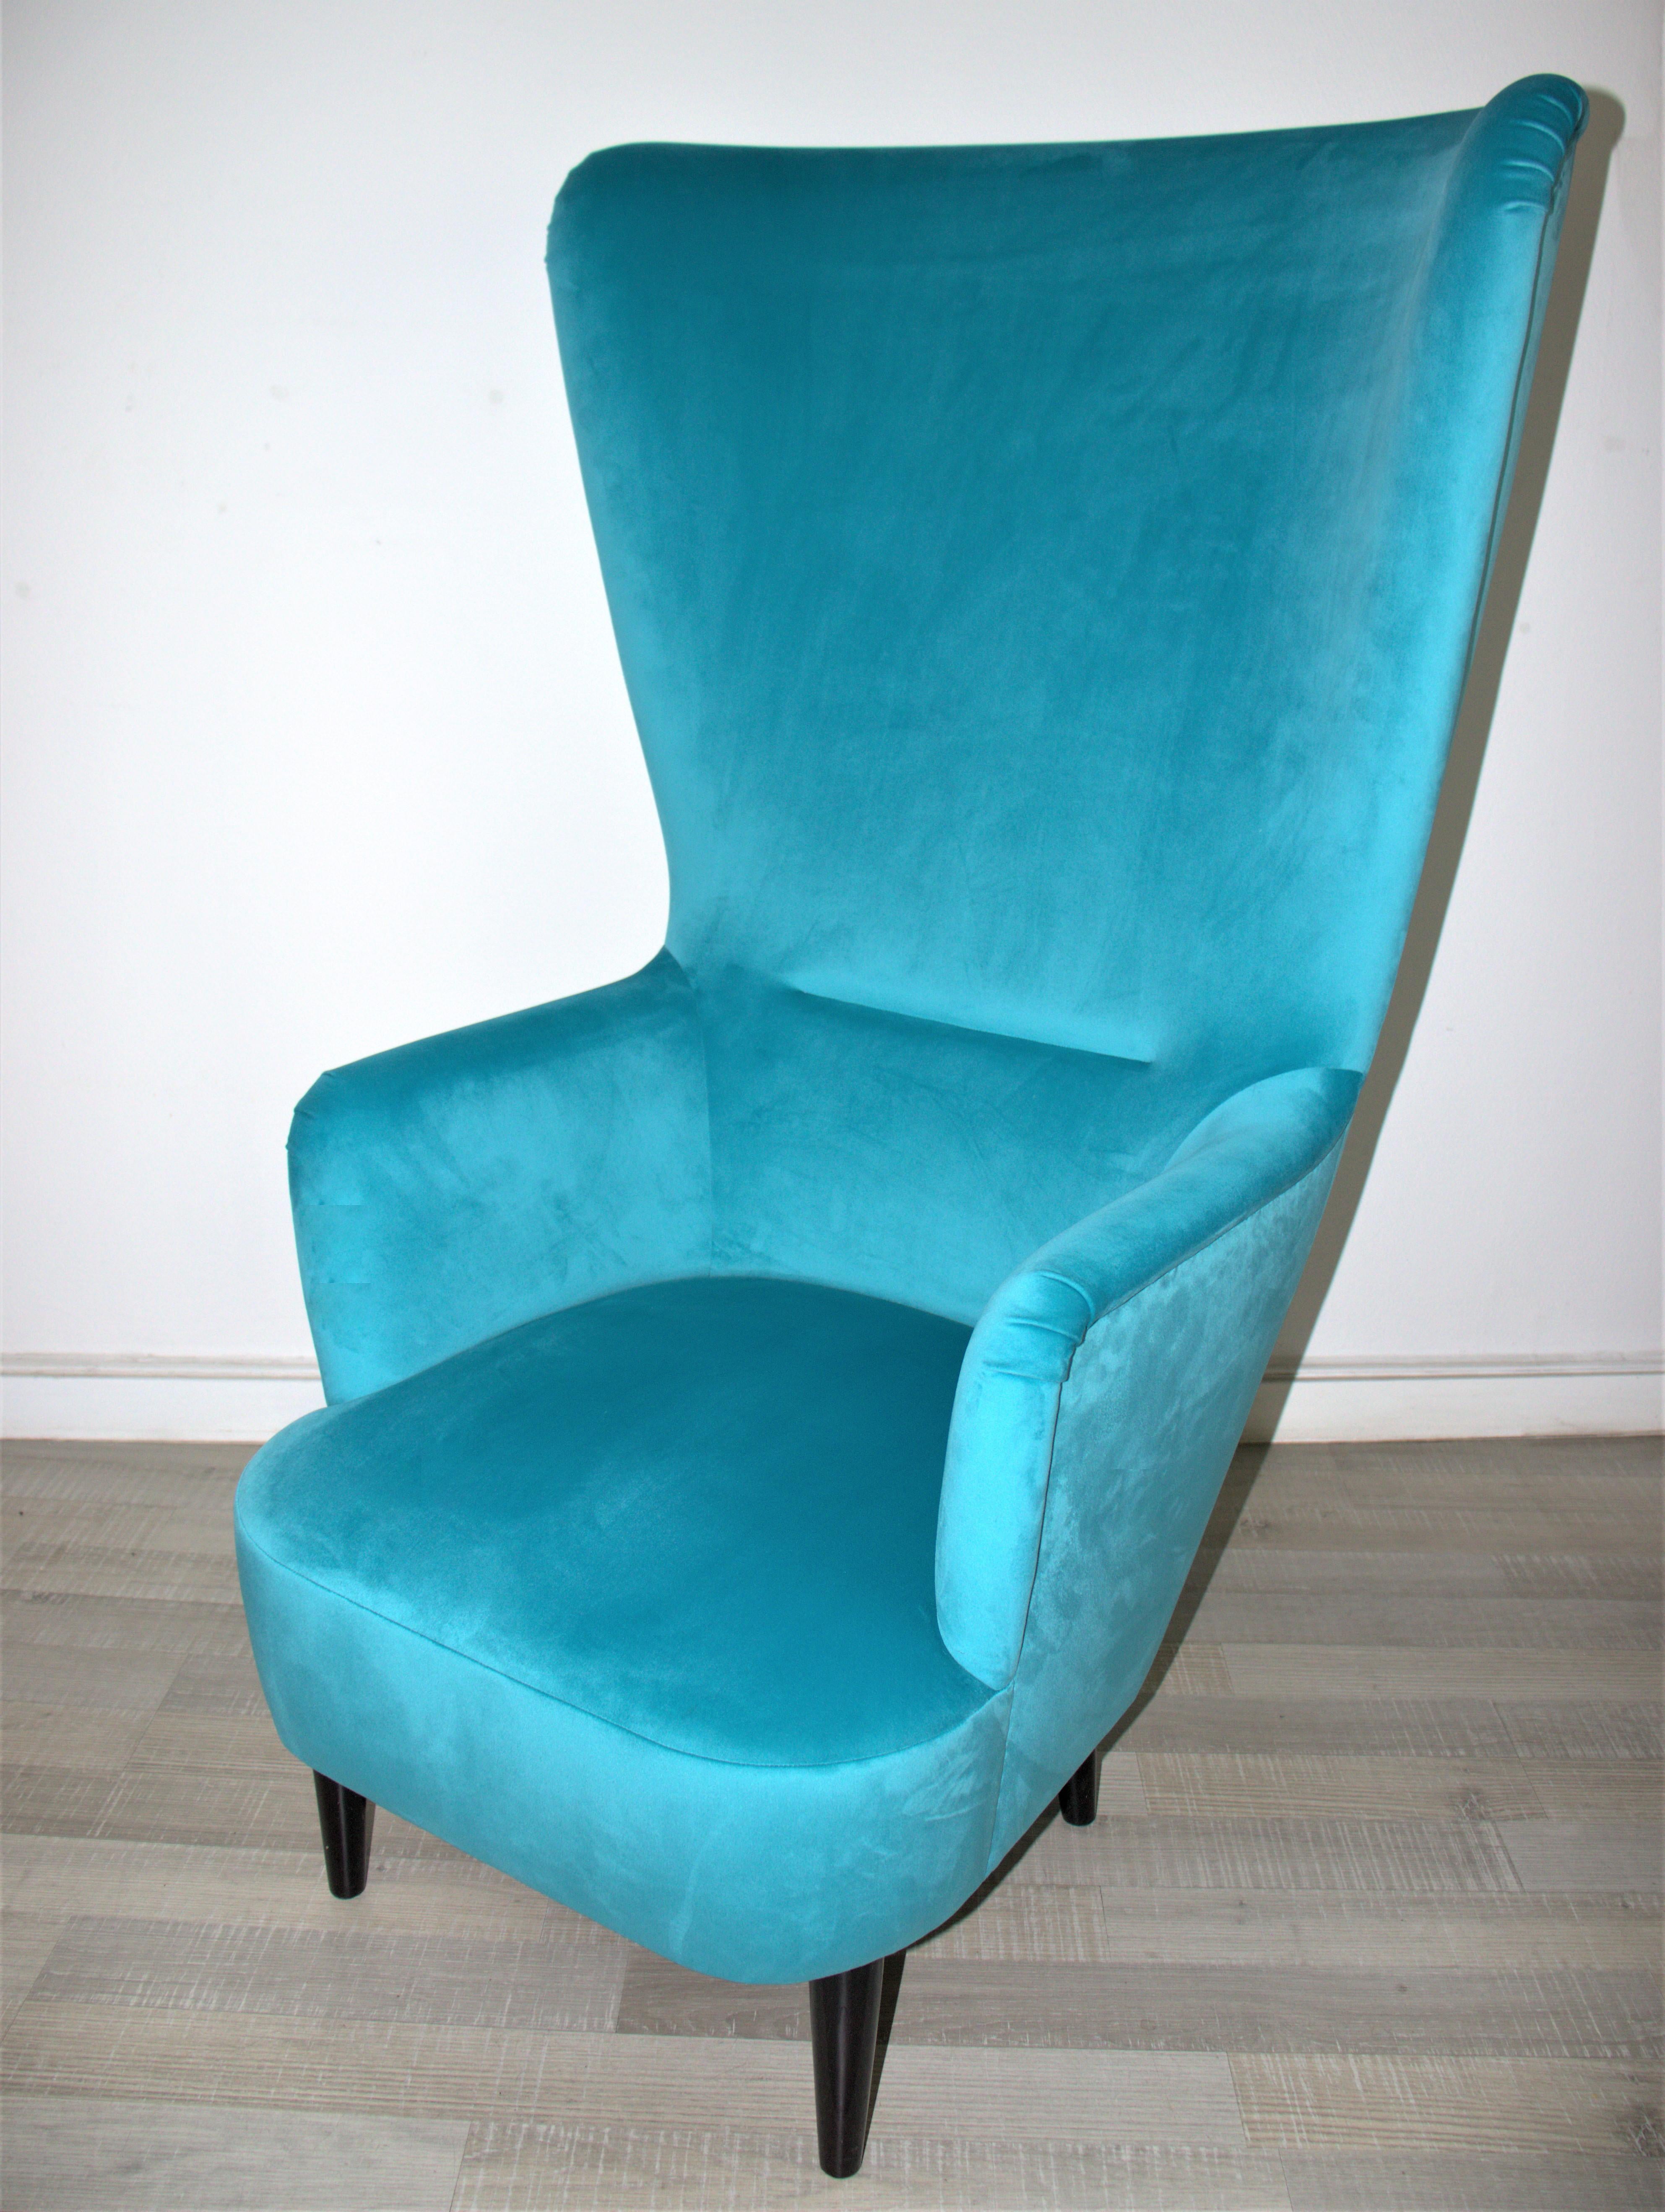 Velvet lounge chair in the style of Tom Dixon.